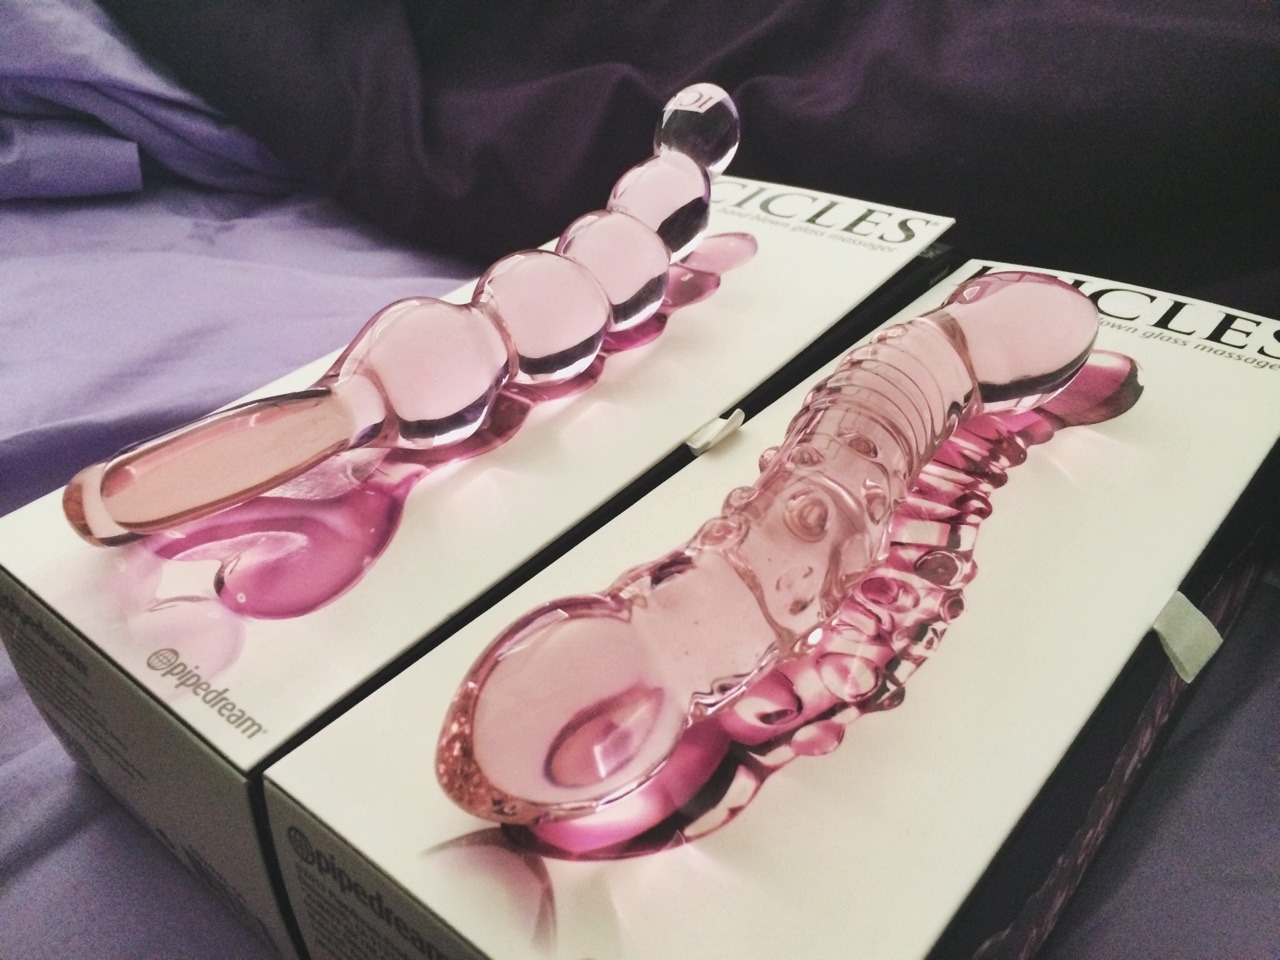 johnniewaswolf:sophie (owlberta) inspired me to buy some new toys. i think i’m